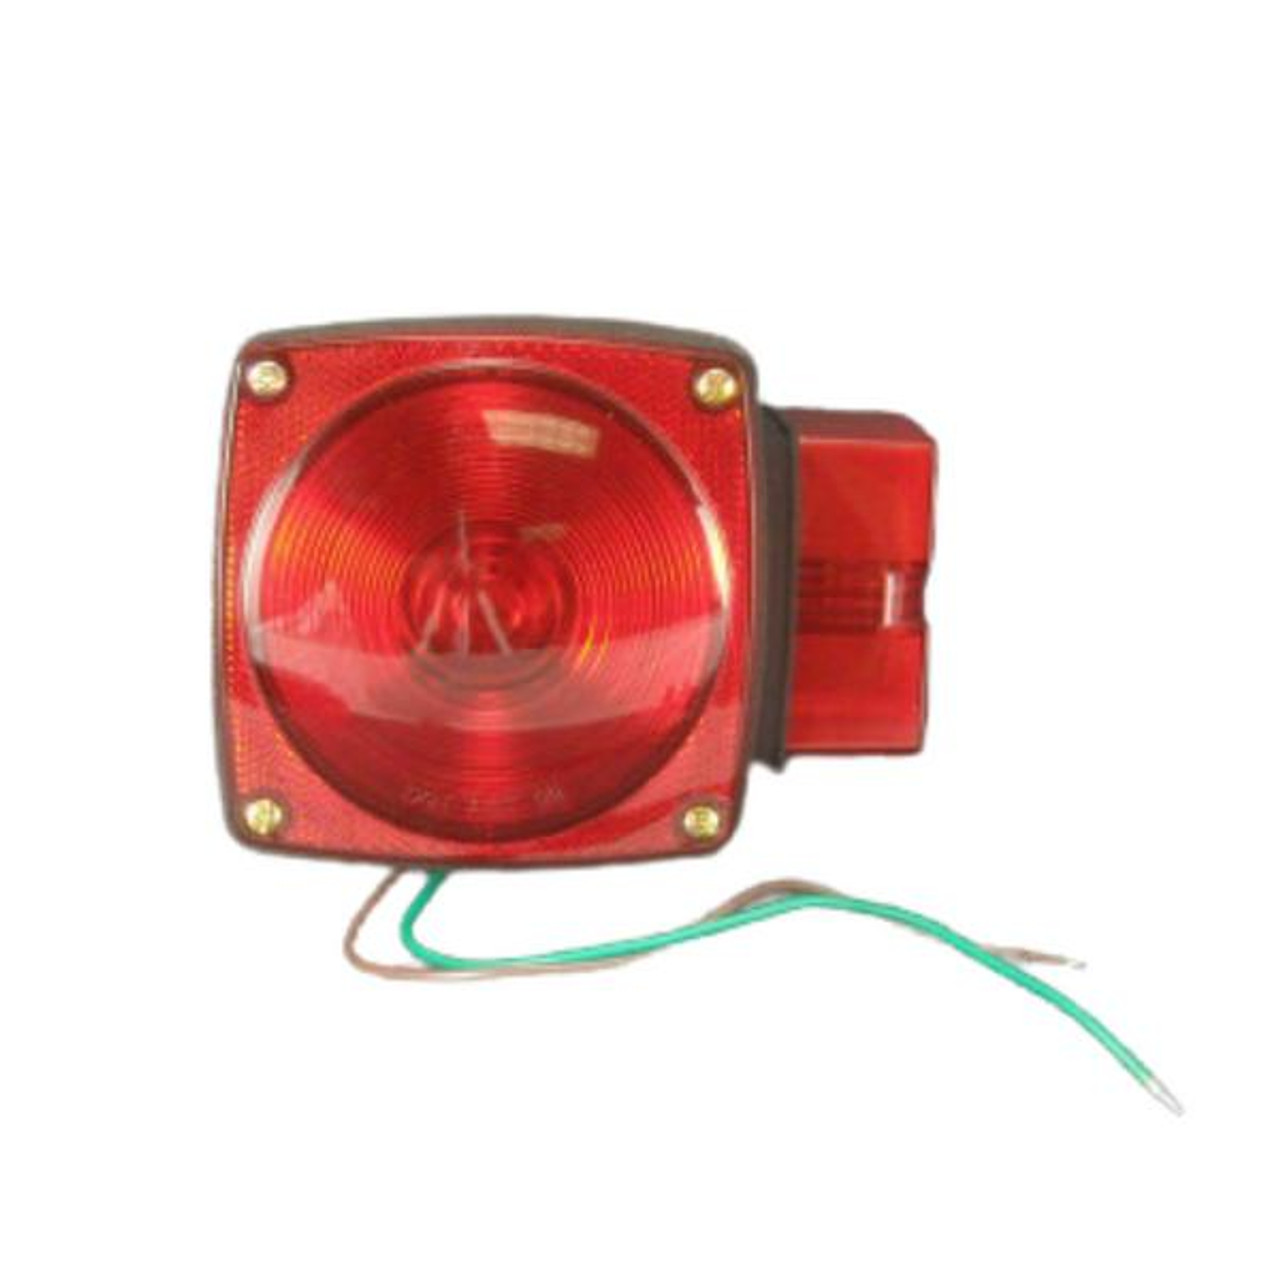 Submersible Tail Light / Turn Signal Right Hand Over 80 Light